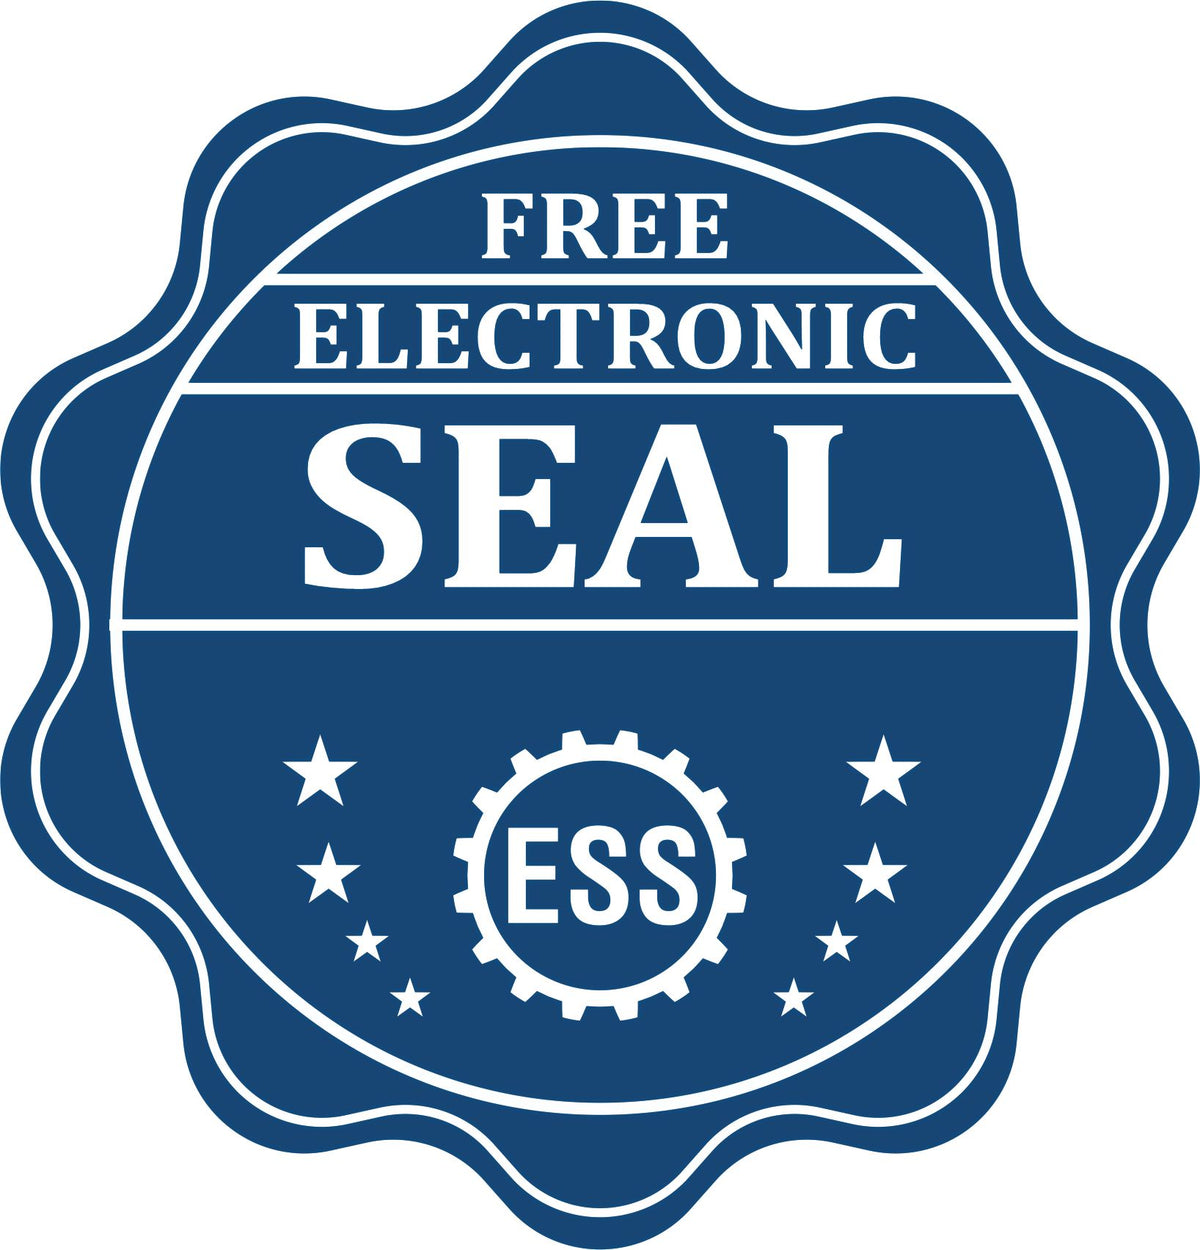 A badge showing a free electronic seal for the Slim Pre-Inked West Virginia Professional Geologist Seal Stamp with stars and the ESS gear on the emblem.